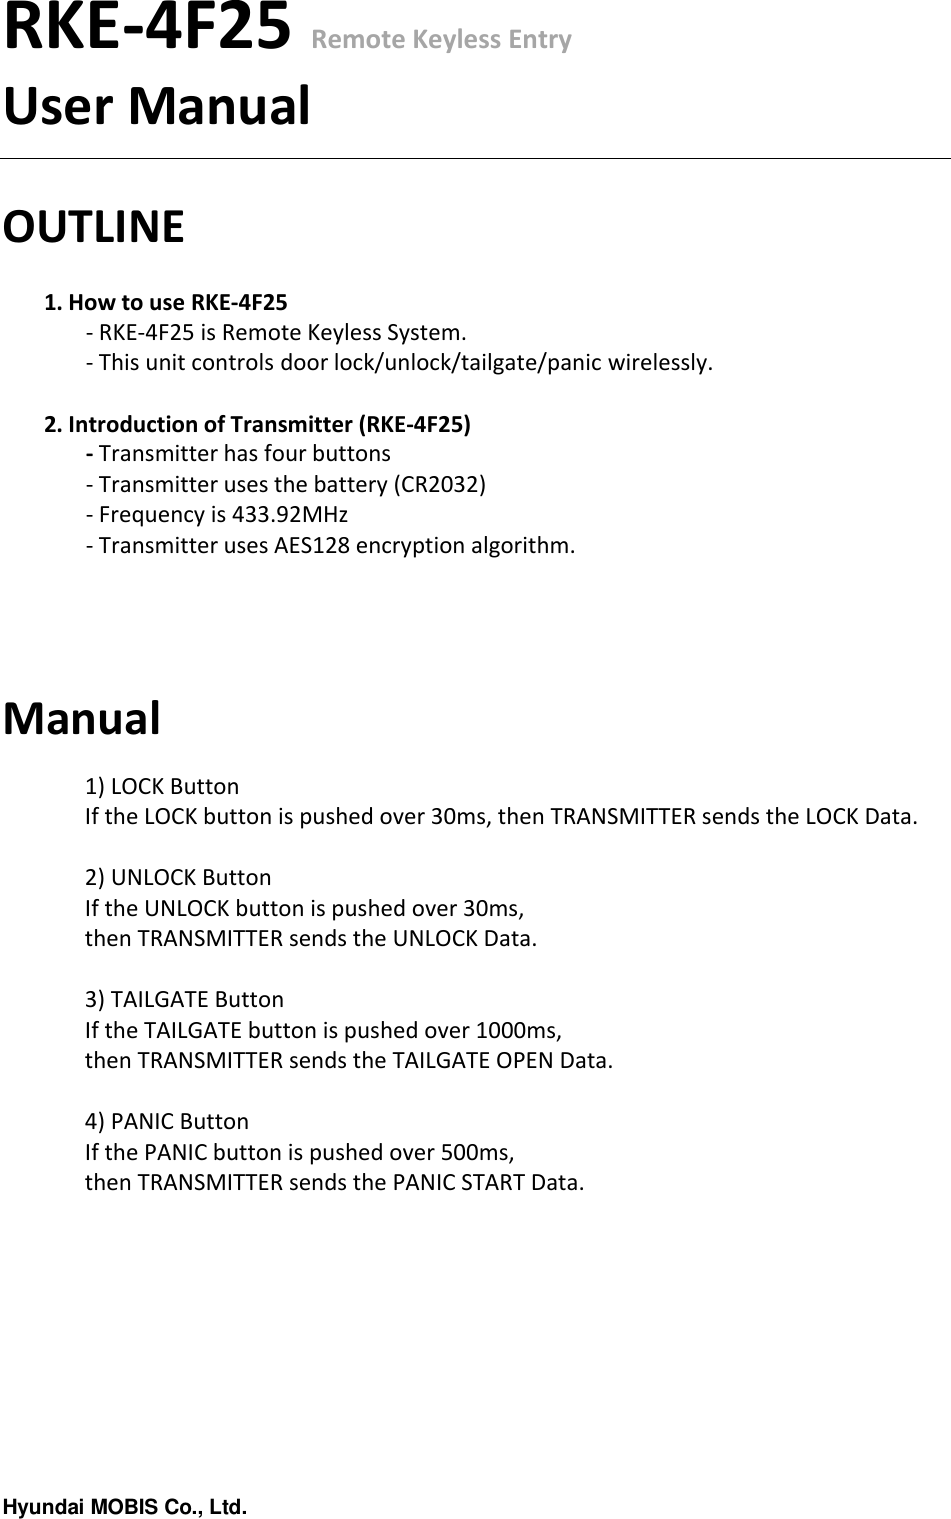 Hyundai MOBIS Co., Ltd.RKE-4F25 Remote Keyless EntryUser ManualOUTLINE1. How to use RKE-4F25- RKE-4F25 is Remote Keyless System.- This unit controls door lock/unlock/tailgate/panic wirelessly.2. Introduction of Transmitter (RKE-4F25)- Transmitter has four buttons- Transmitter uses the battery (CR2032)- Frequency is 433.92MHz- Transmitter uses AES128 encryption algorithm.Manual1) LOCK ButtonIf the LOCK button is pushed over 30ms, then TRANSMITTER sends the LOCK Data.2) UNLOCK ButtonIf the UNLOCK button is pushed over 30ms, then TRANSMITTER sends the UNLOCK Data.3) TAILGATE ButtonIf the TAILGATE button is pushed over 1000ms, then TRANSMITTER sends the TAILGATE OPEN Data.4) PANIC ButtonIf the PANIC button is pushed over 500ms,then TRANSMITTER sends the PANIC START Data.